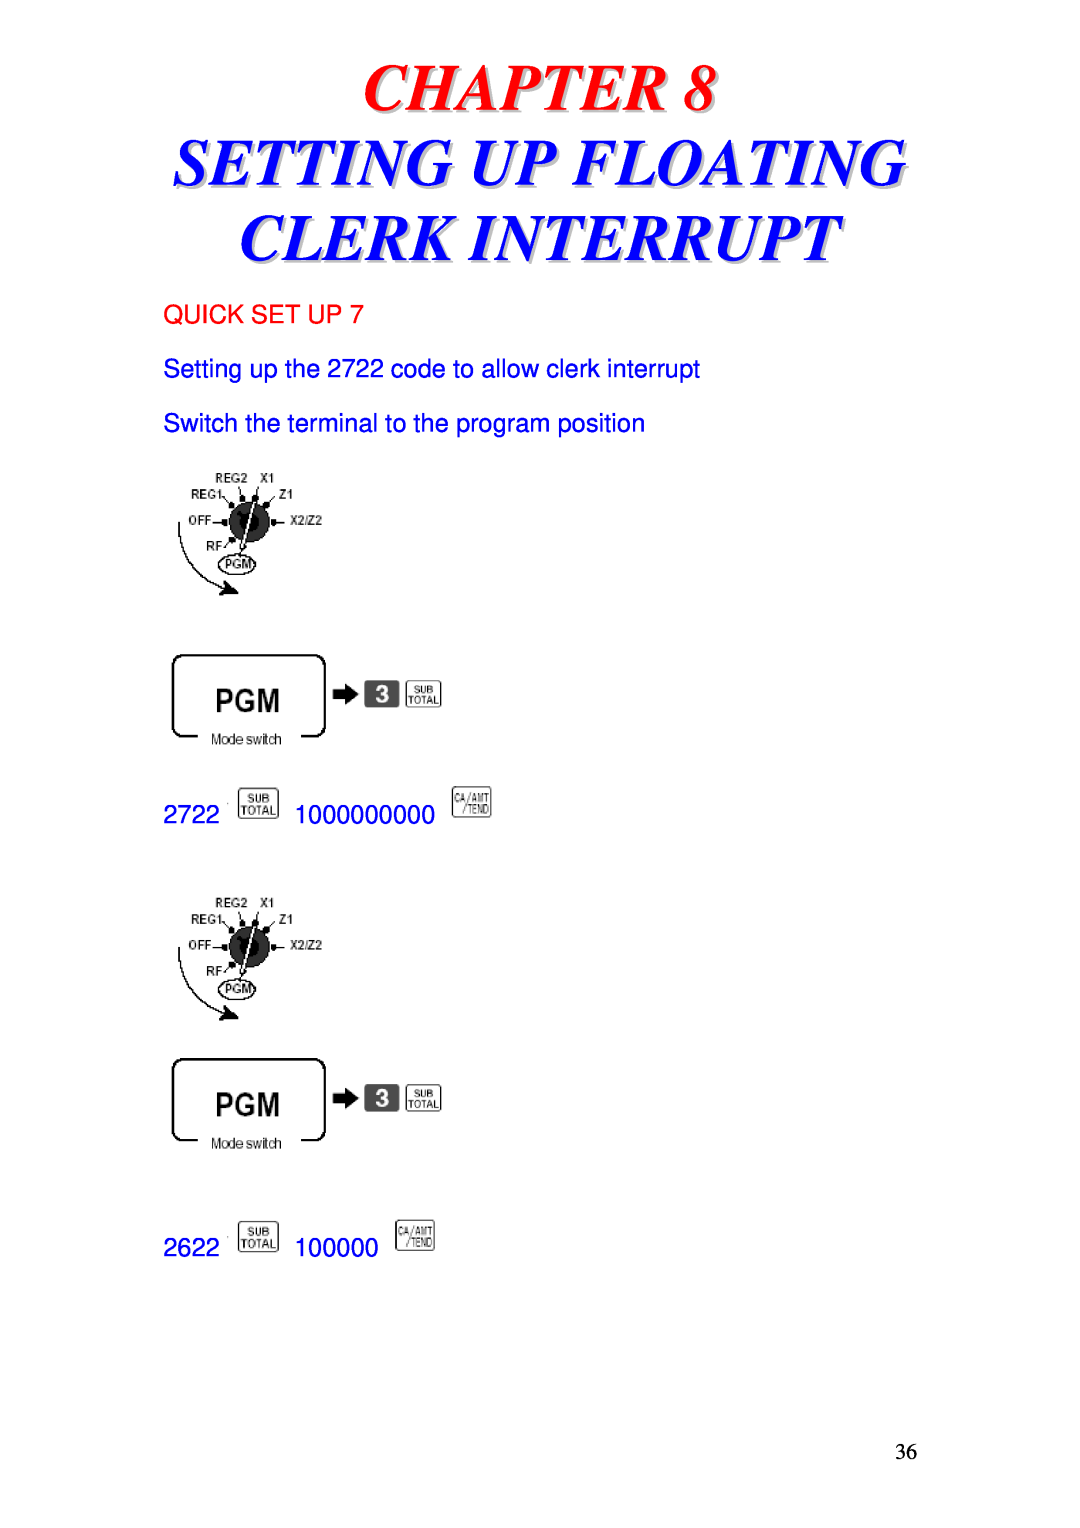 Delta TE-4000 manual Setting Up Floating Clerk Interrupt, Setting up the 2722 code to allow clerk interrupt, Chapter 